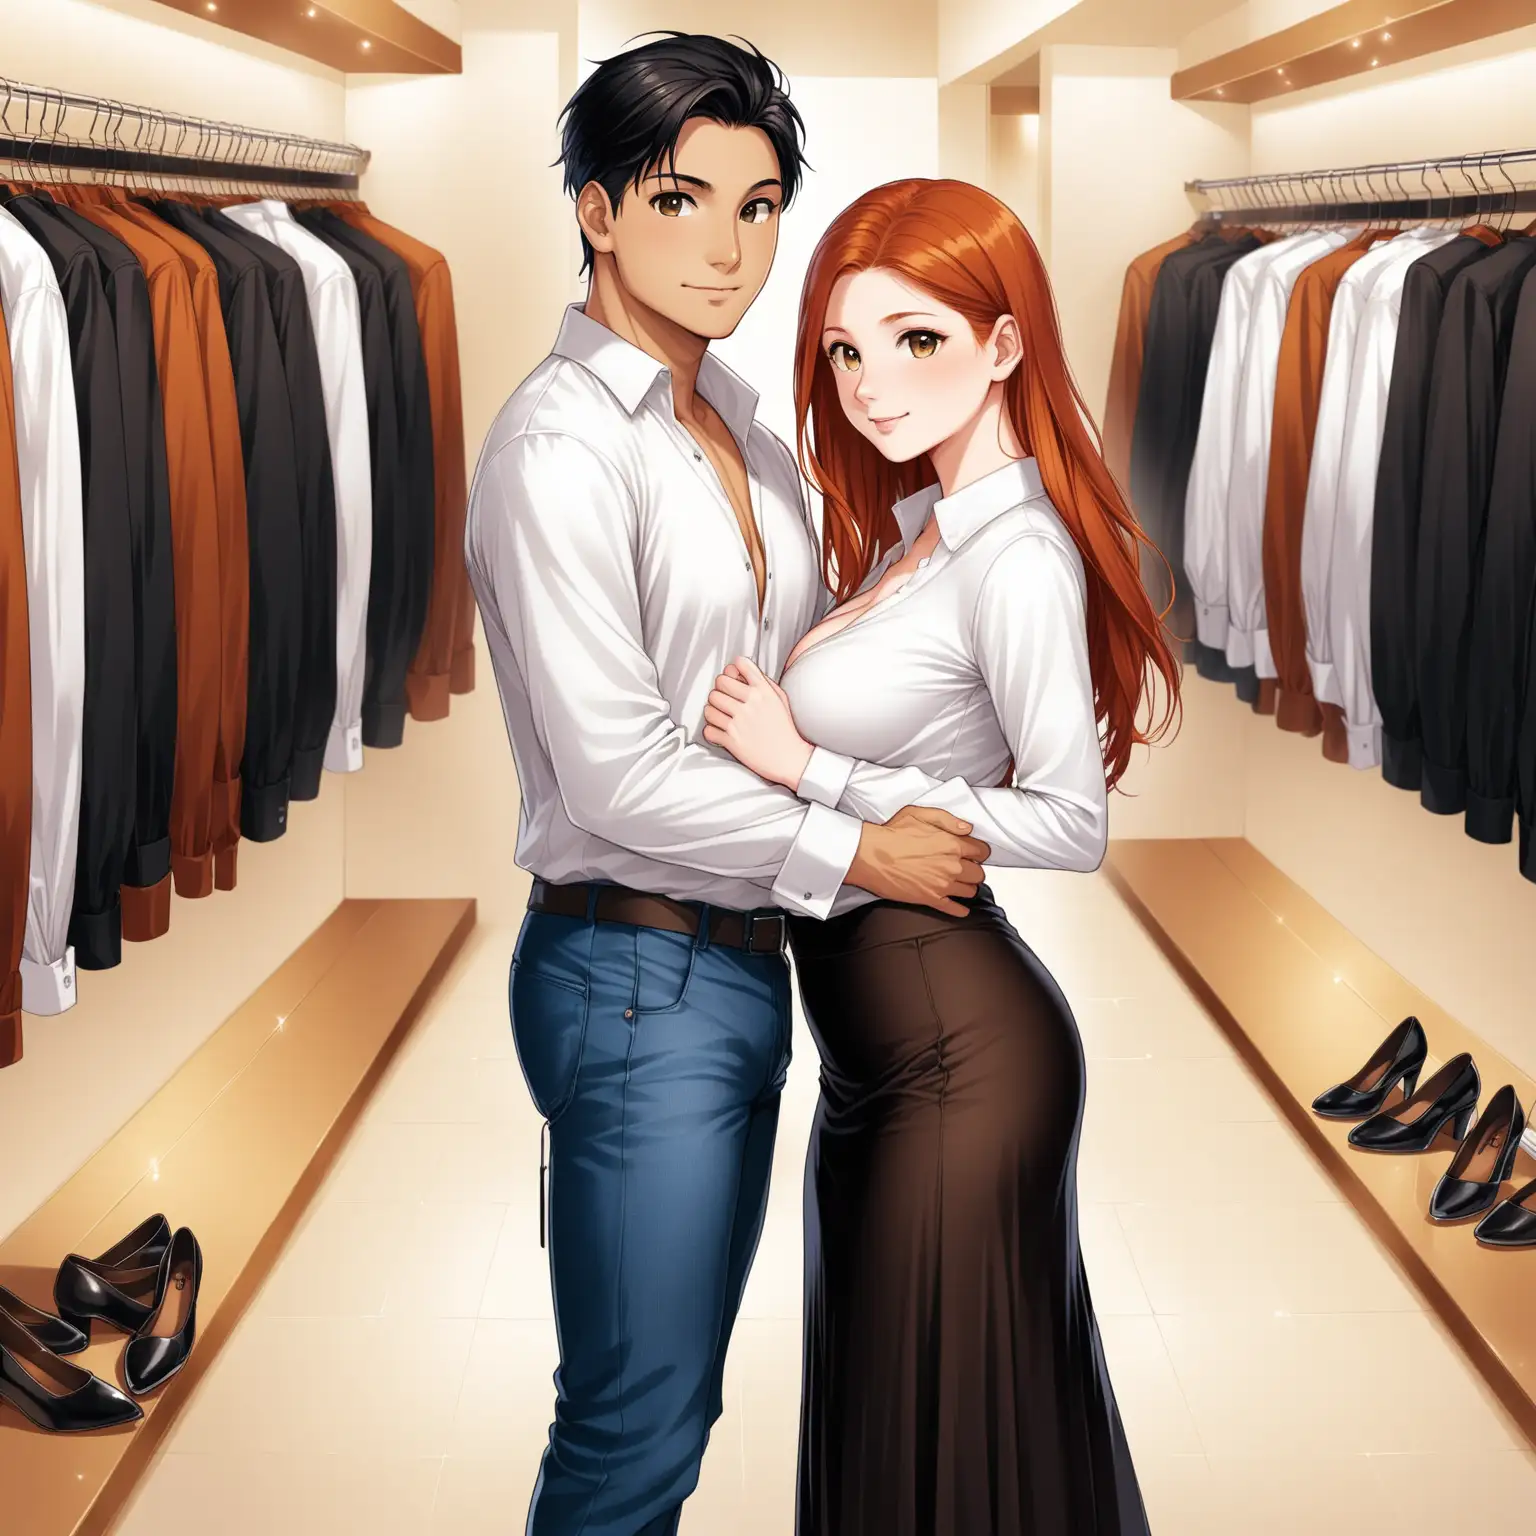 Affectionate Couple Shopping for Fashion Stylish Encounter in a Clothing Store